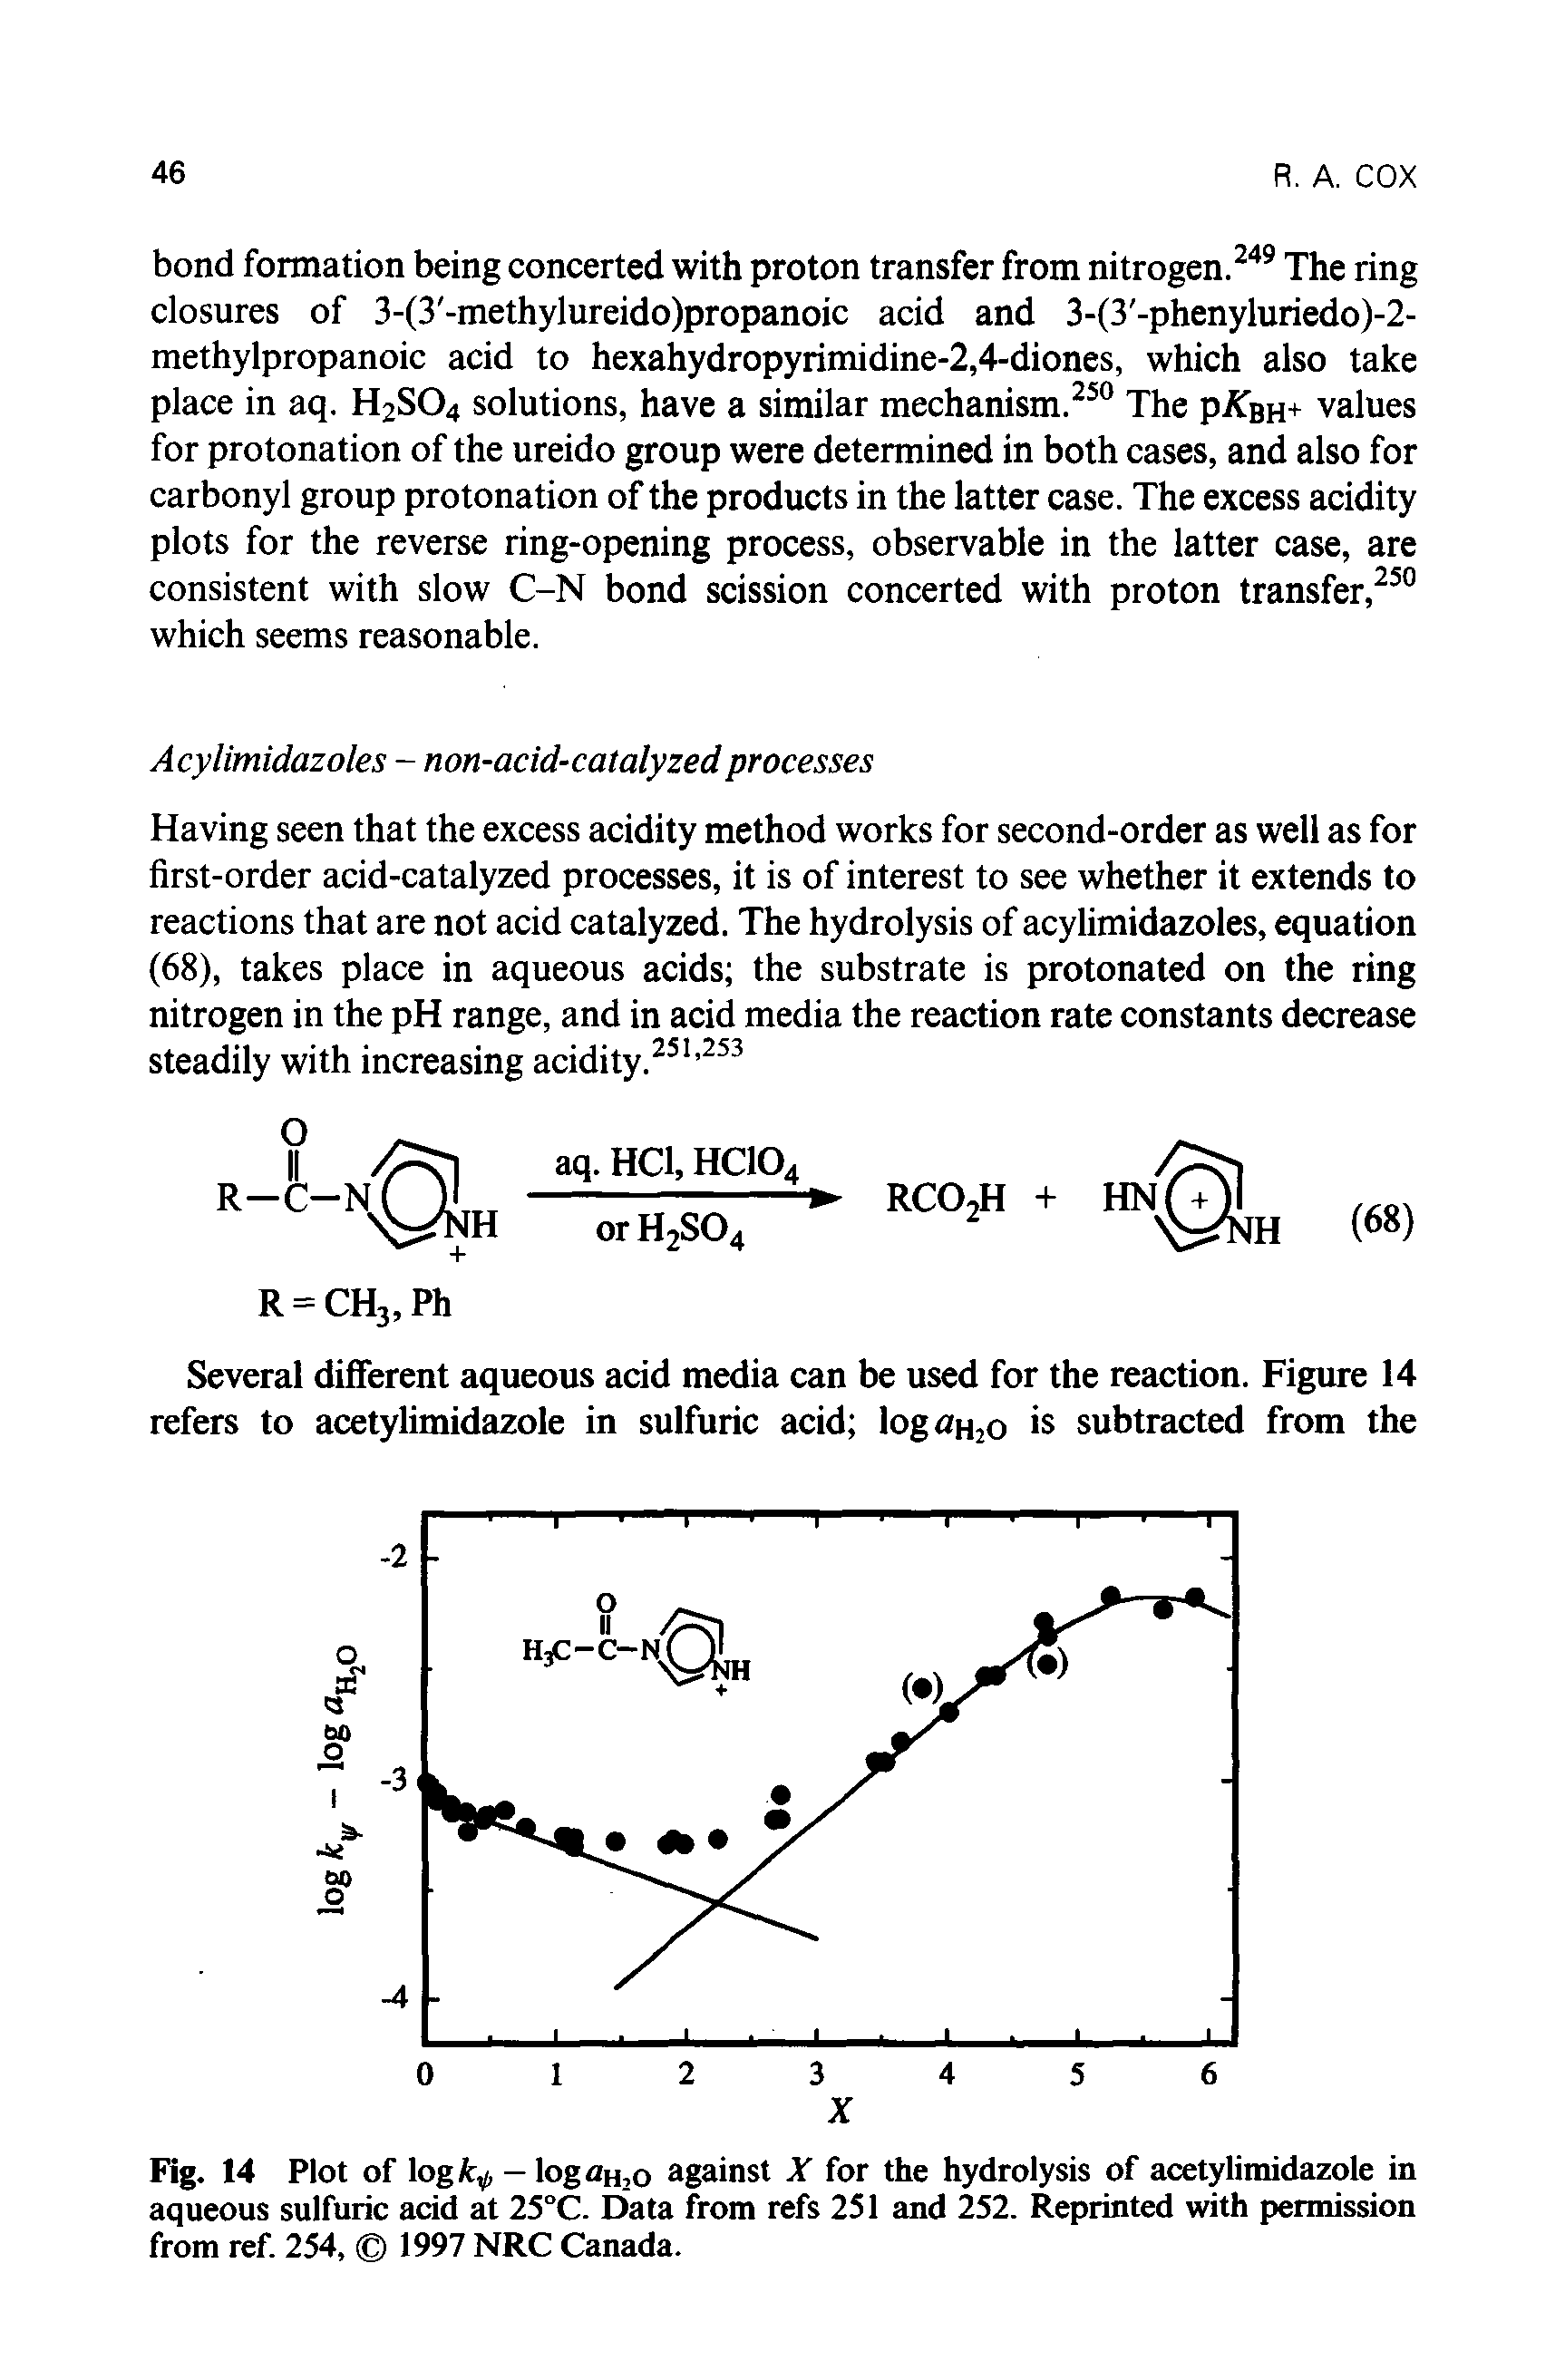 Fig. 14 Plot of logk, — logaH,o against X for the hydrolysis of acetylimidazole in aqueous sulfuric acid at 25°C. Data from refs 251 and 252. Reprinted with permission from ref. 254, 1997 NRC Canada.